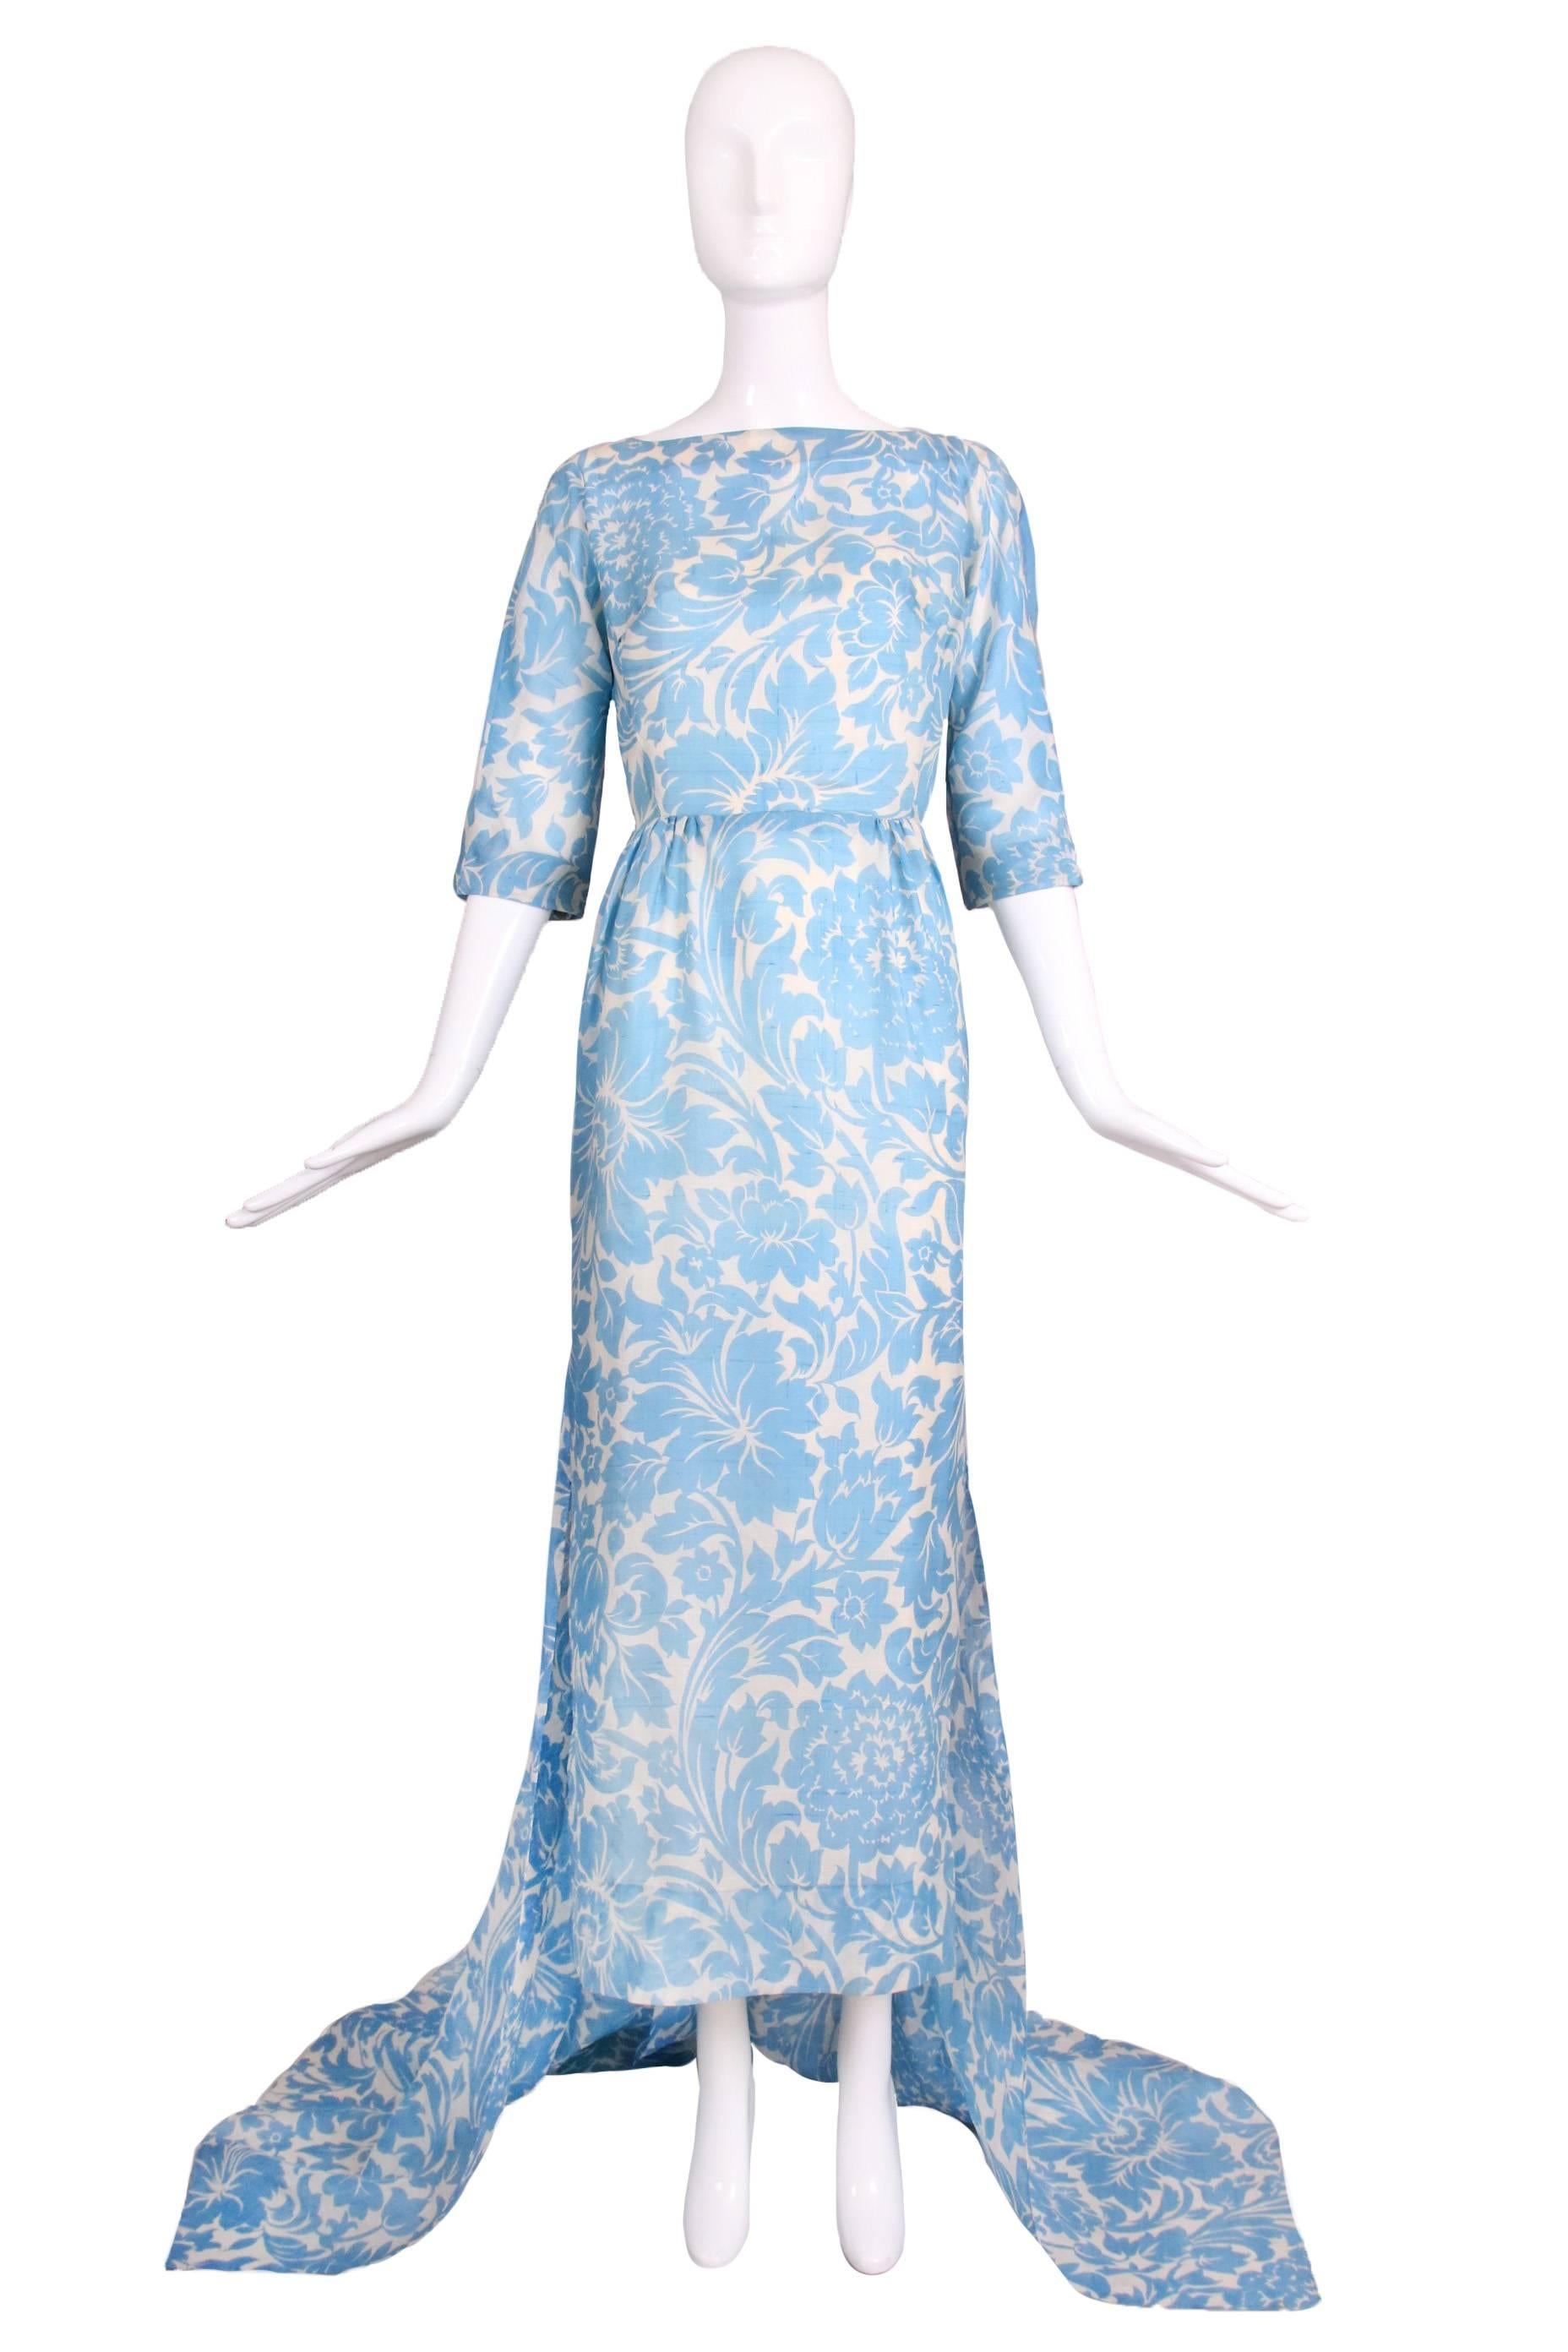 Vintage Pauline Trigere linen light blue and white floral gown with open back and train. Comes with white silk slip attached at the interior. In excellent condition. No size tag so please consult measurements.
MEASUREMENTS:
Bust - 34